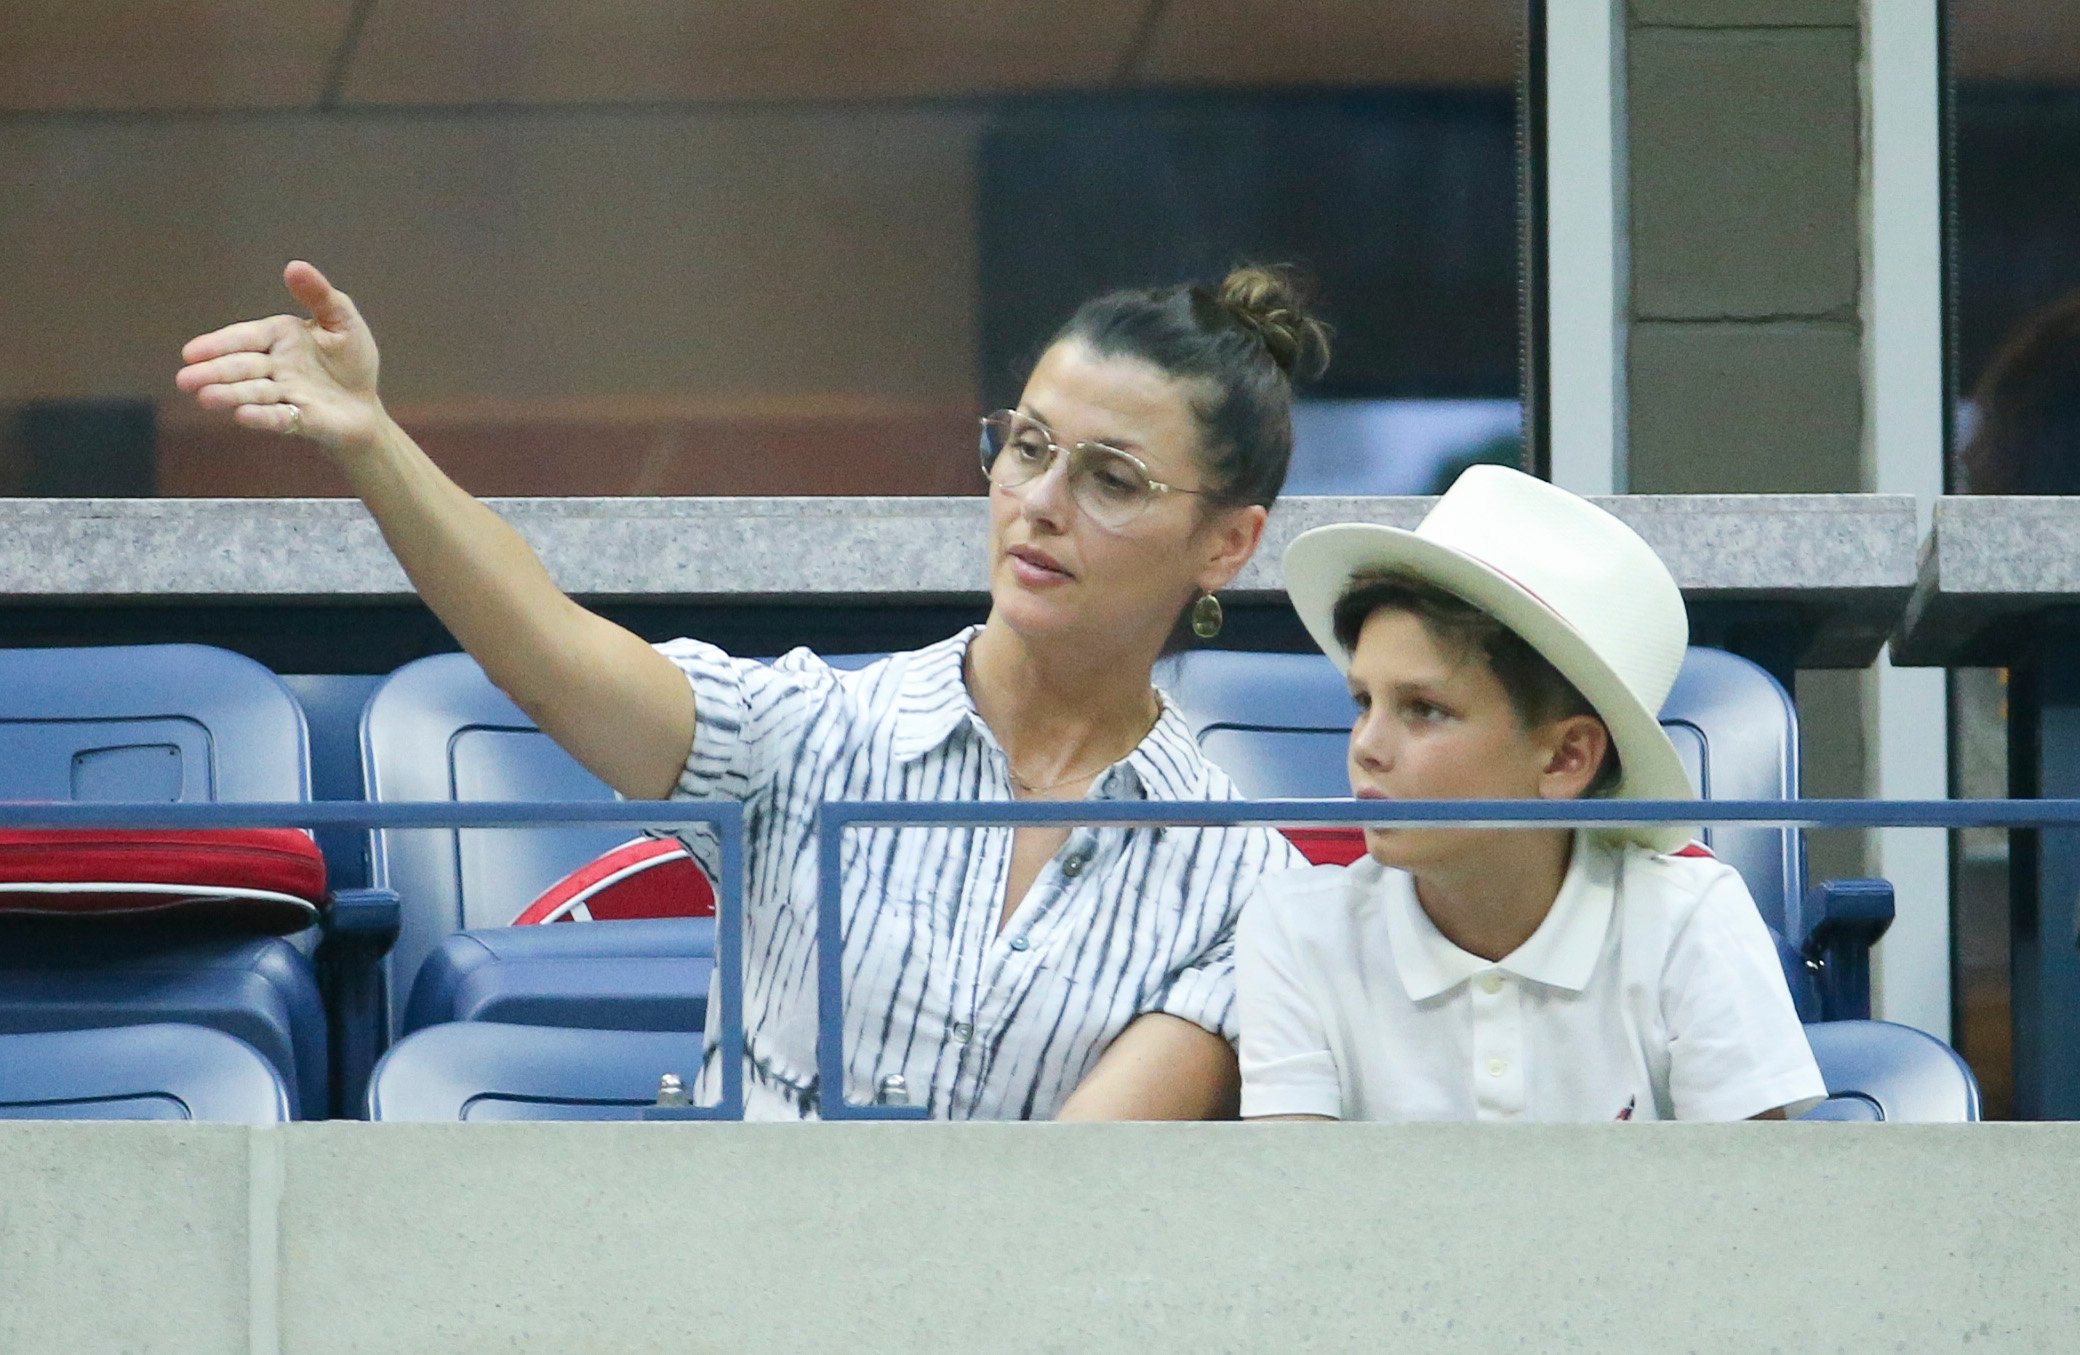 Bridget Moynahan and Tom Brady's Son - How the Blue Bloods and